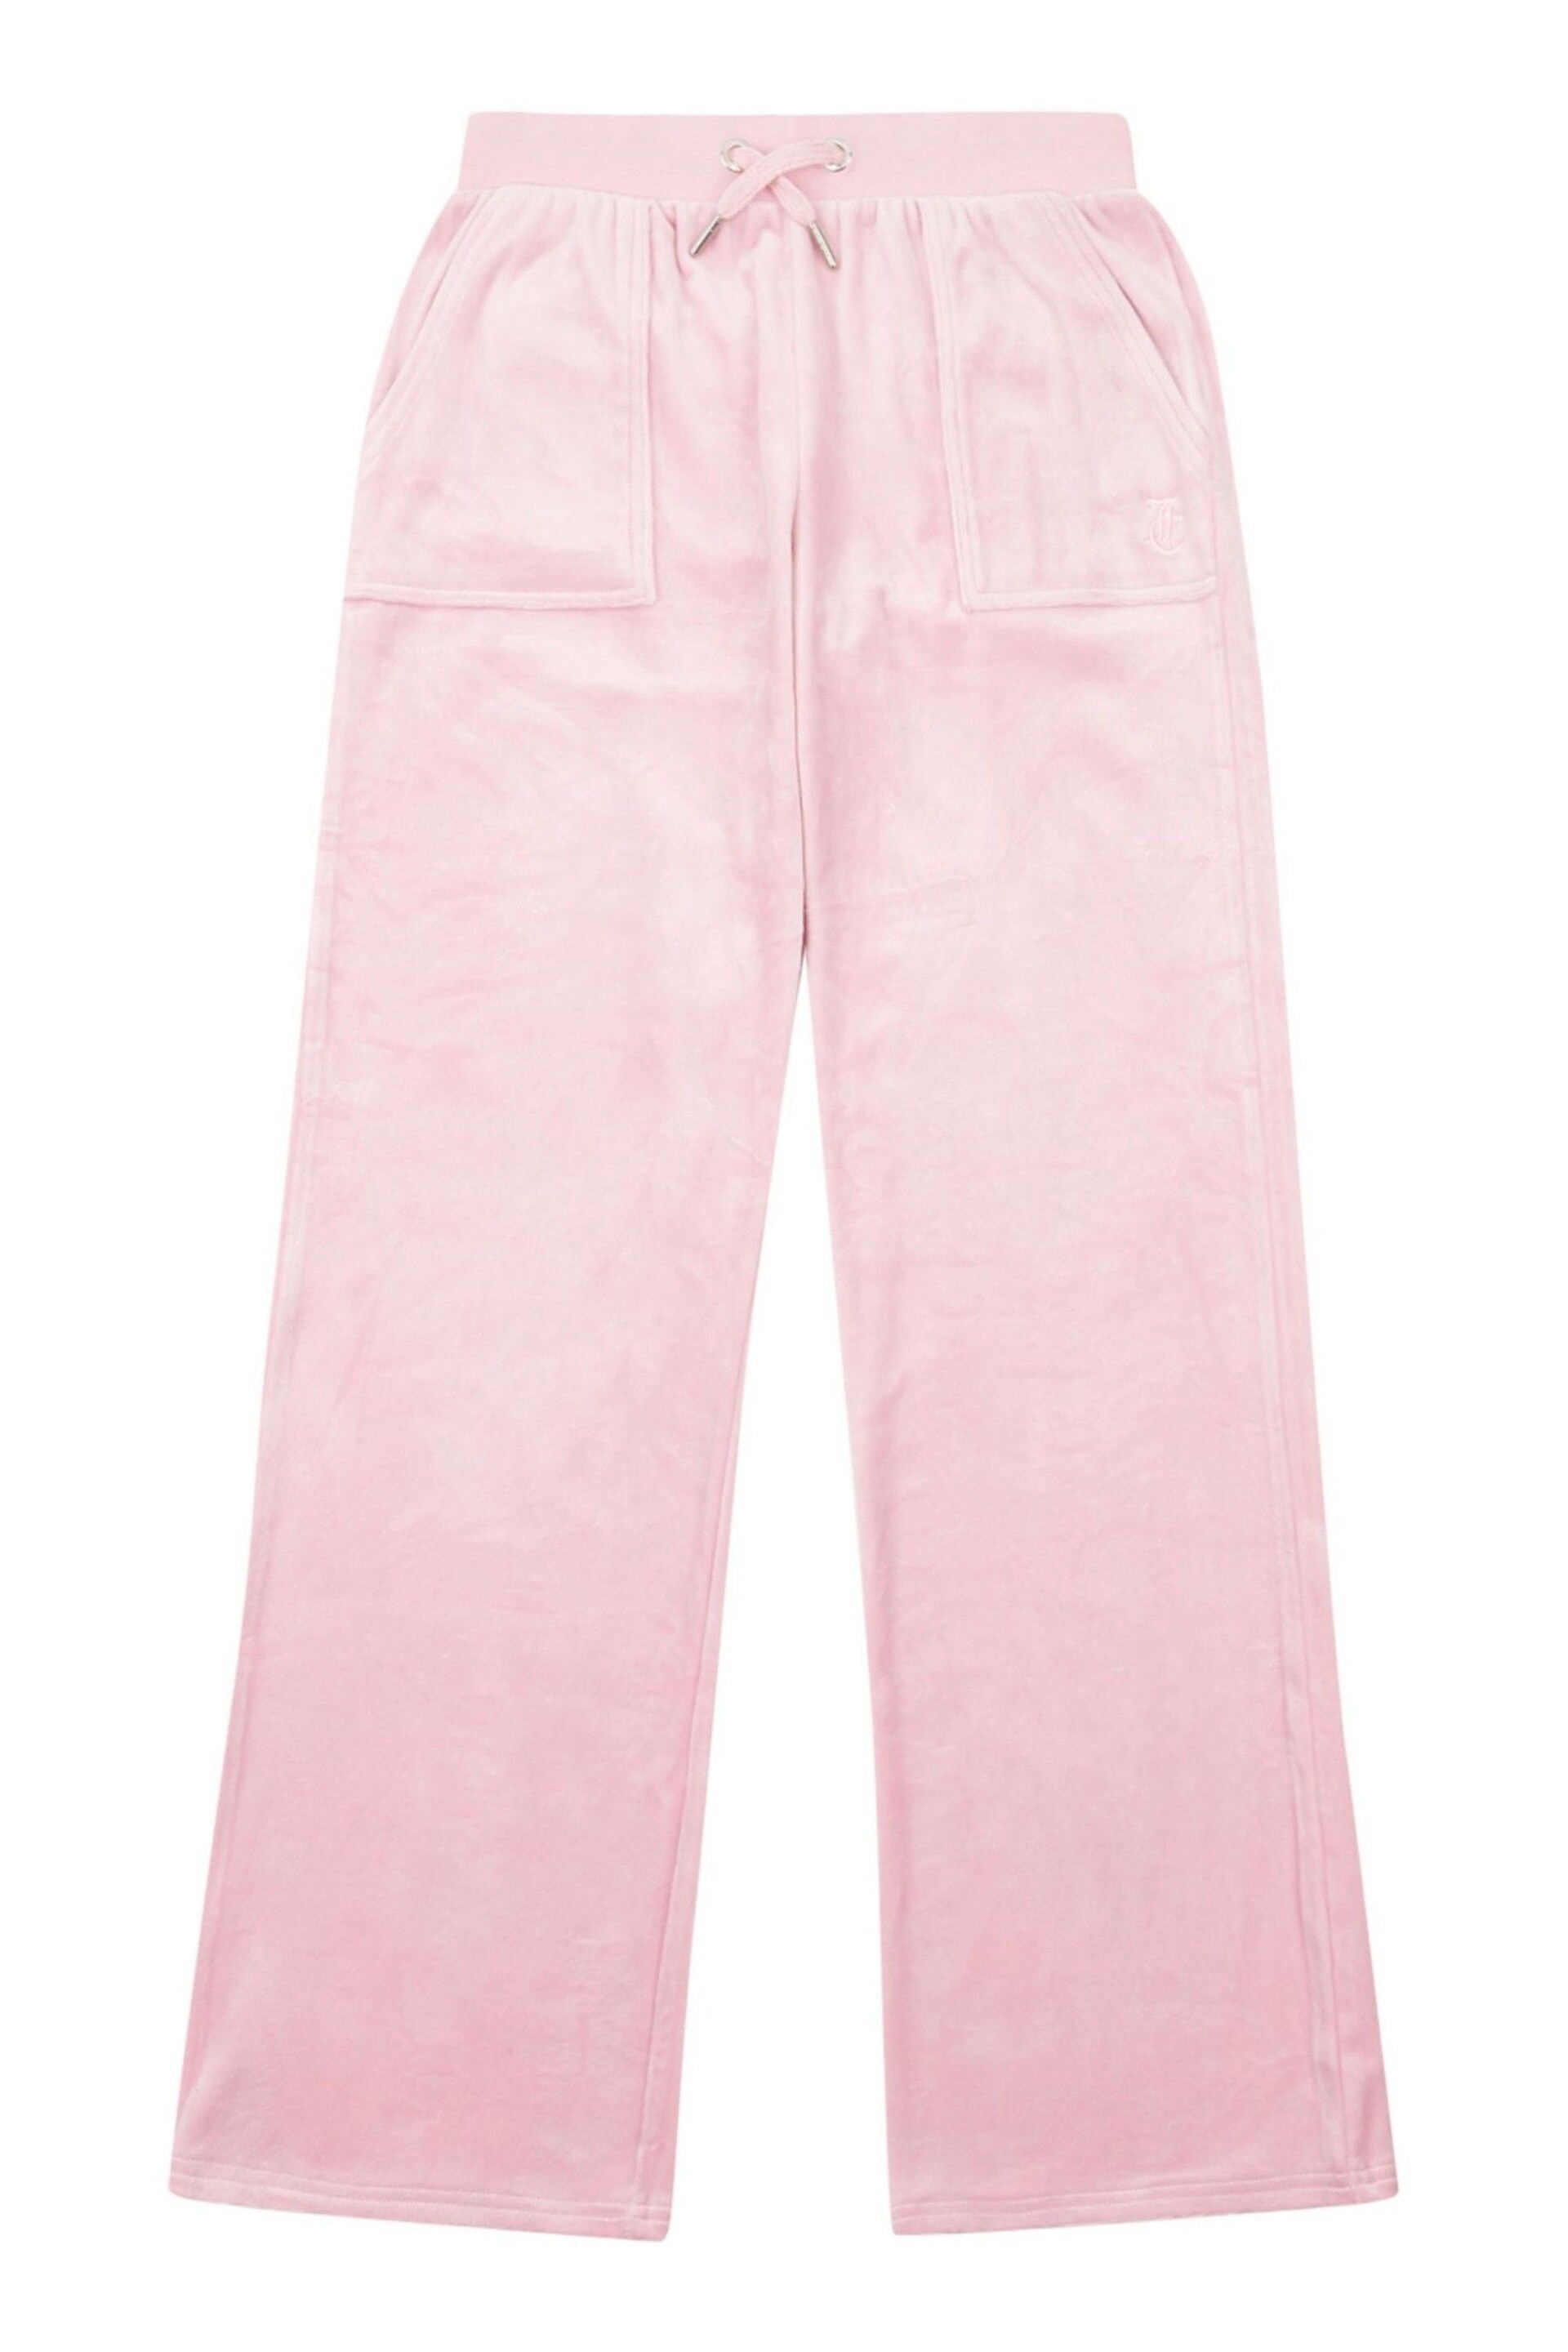 Juicy Couture Girls Velour Patch Pocket Joggers - Image 1 of 3